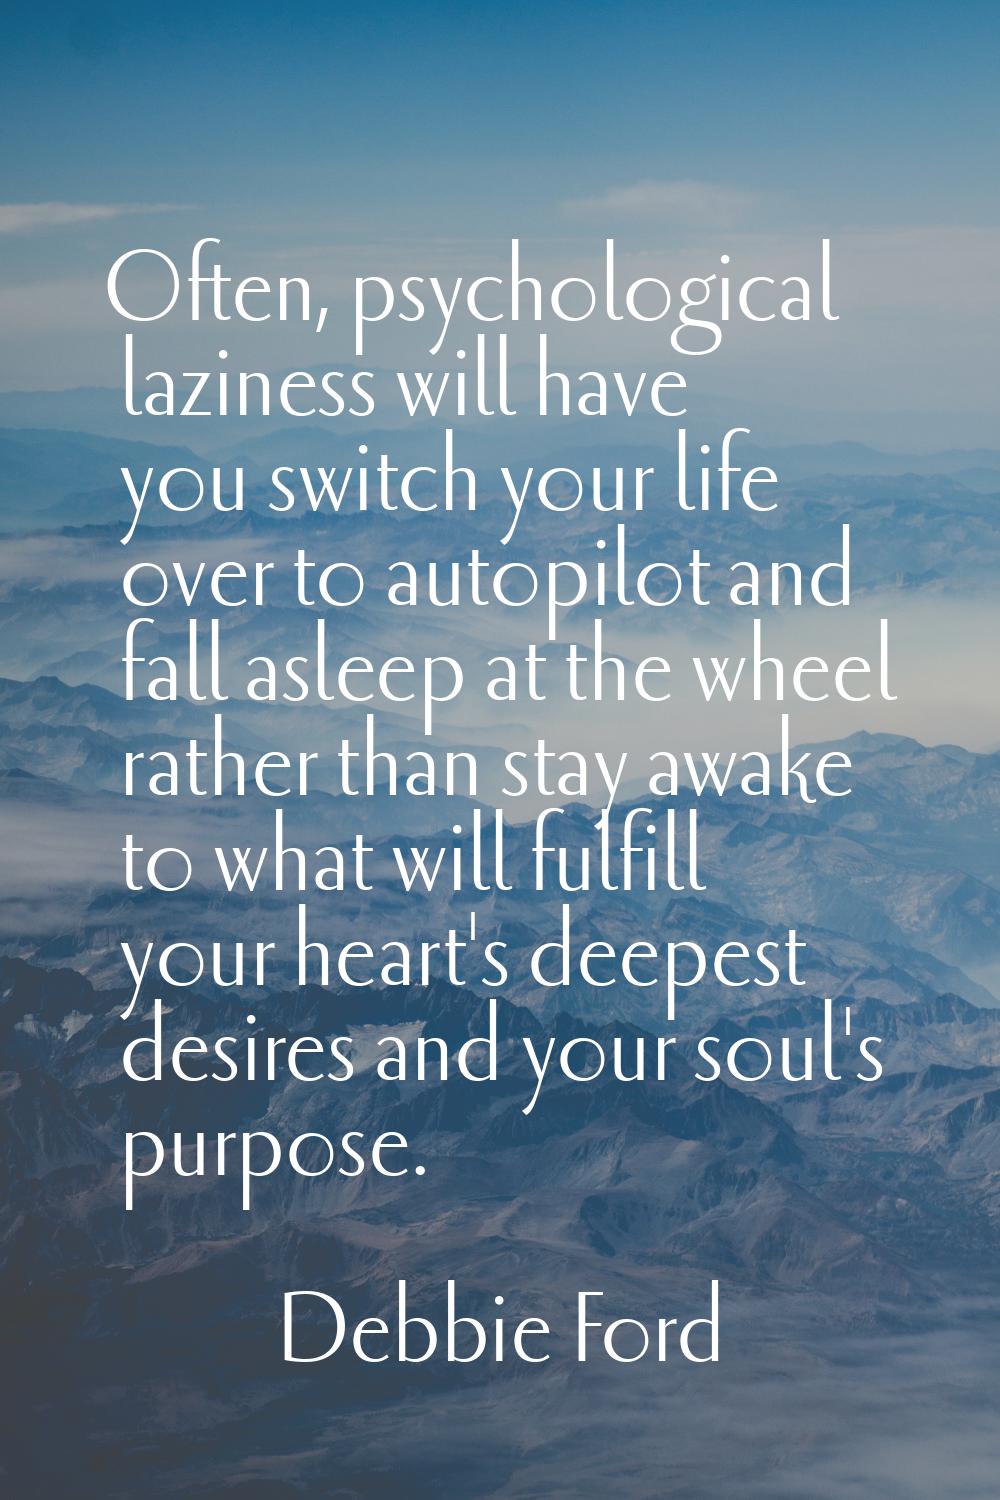 Often, psychological laziness will have you switch your life over to autopilot and fall asleep at t